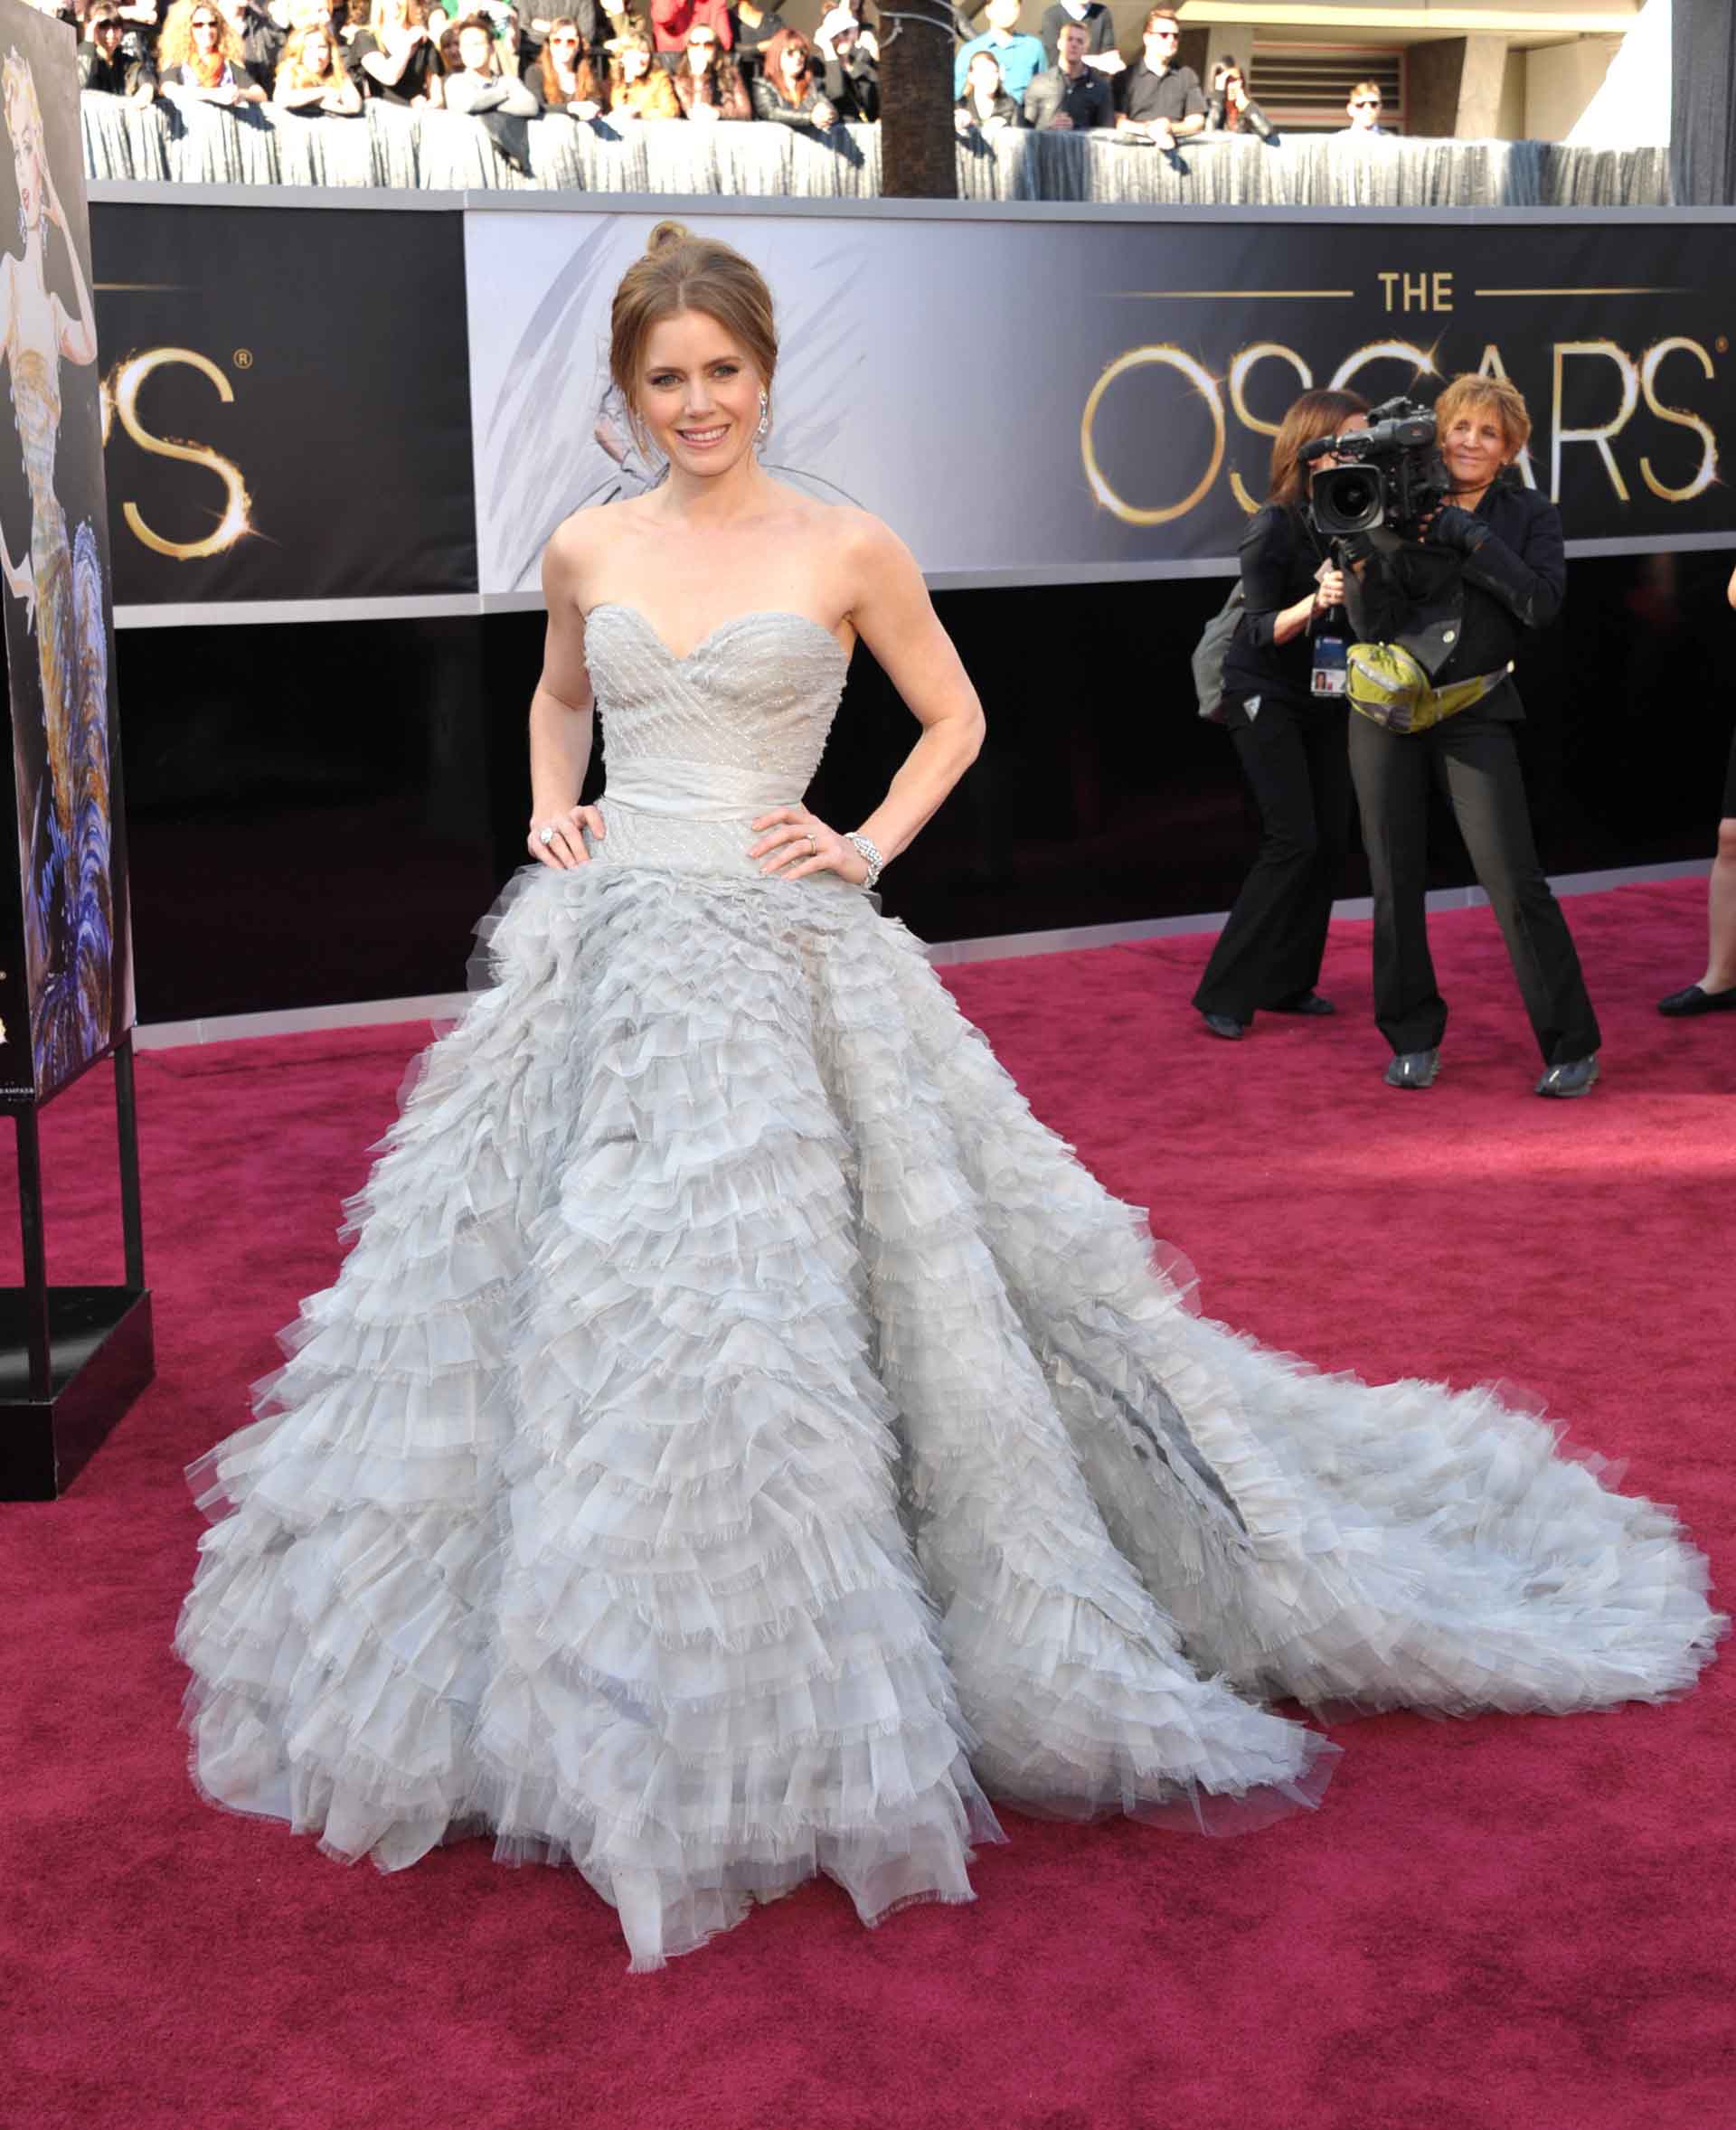 Actress Amy Adams arriving for the 85th Academy Awards " The Oscars " on Sunday Feb. 24, 2013, in Los Angeles.